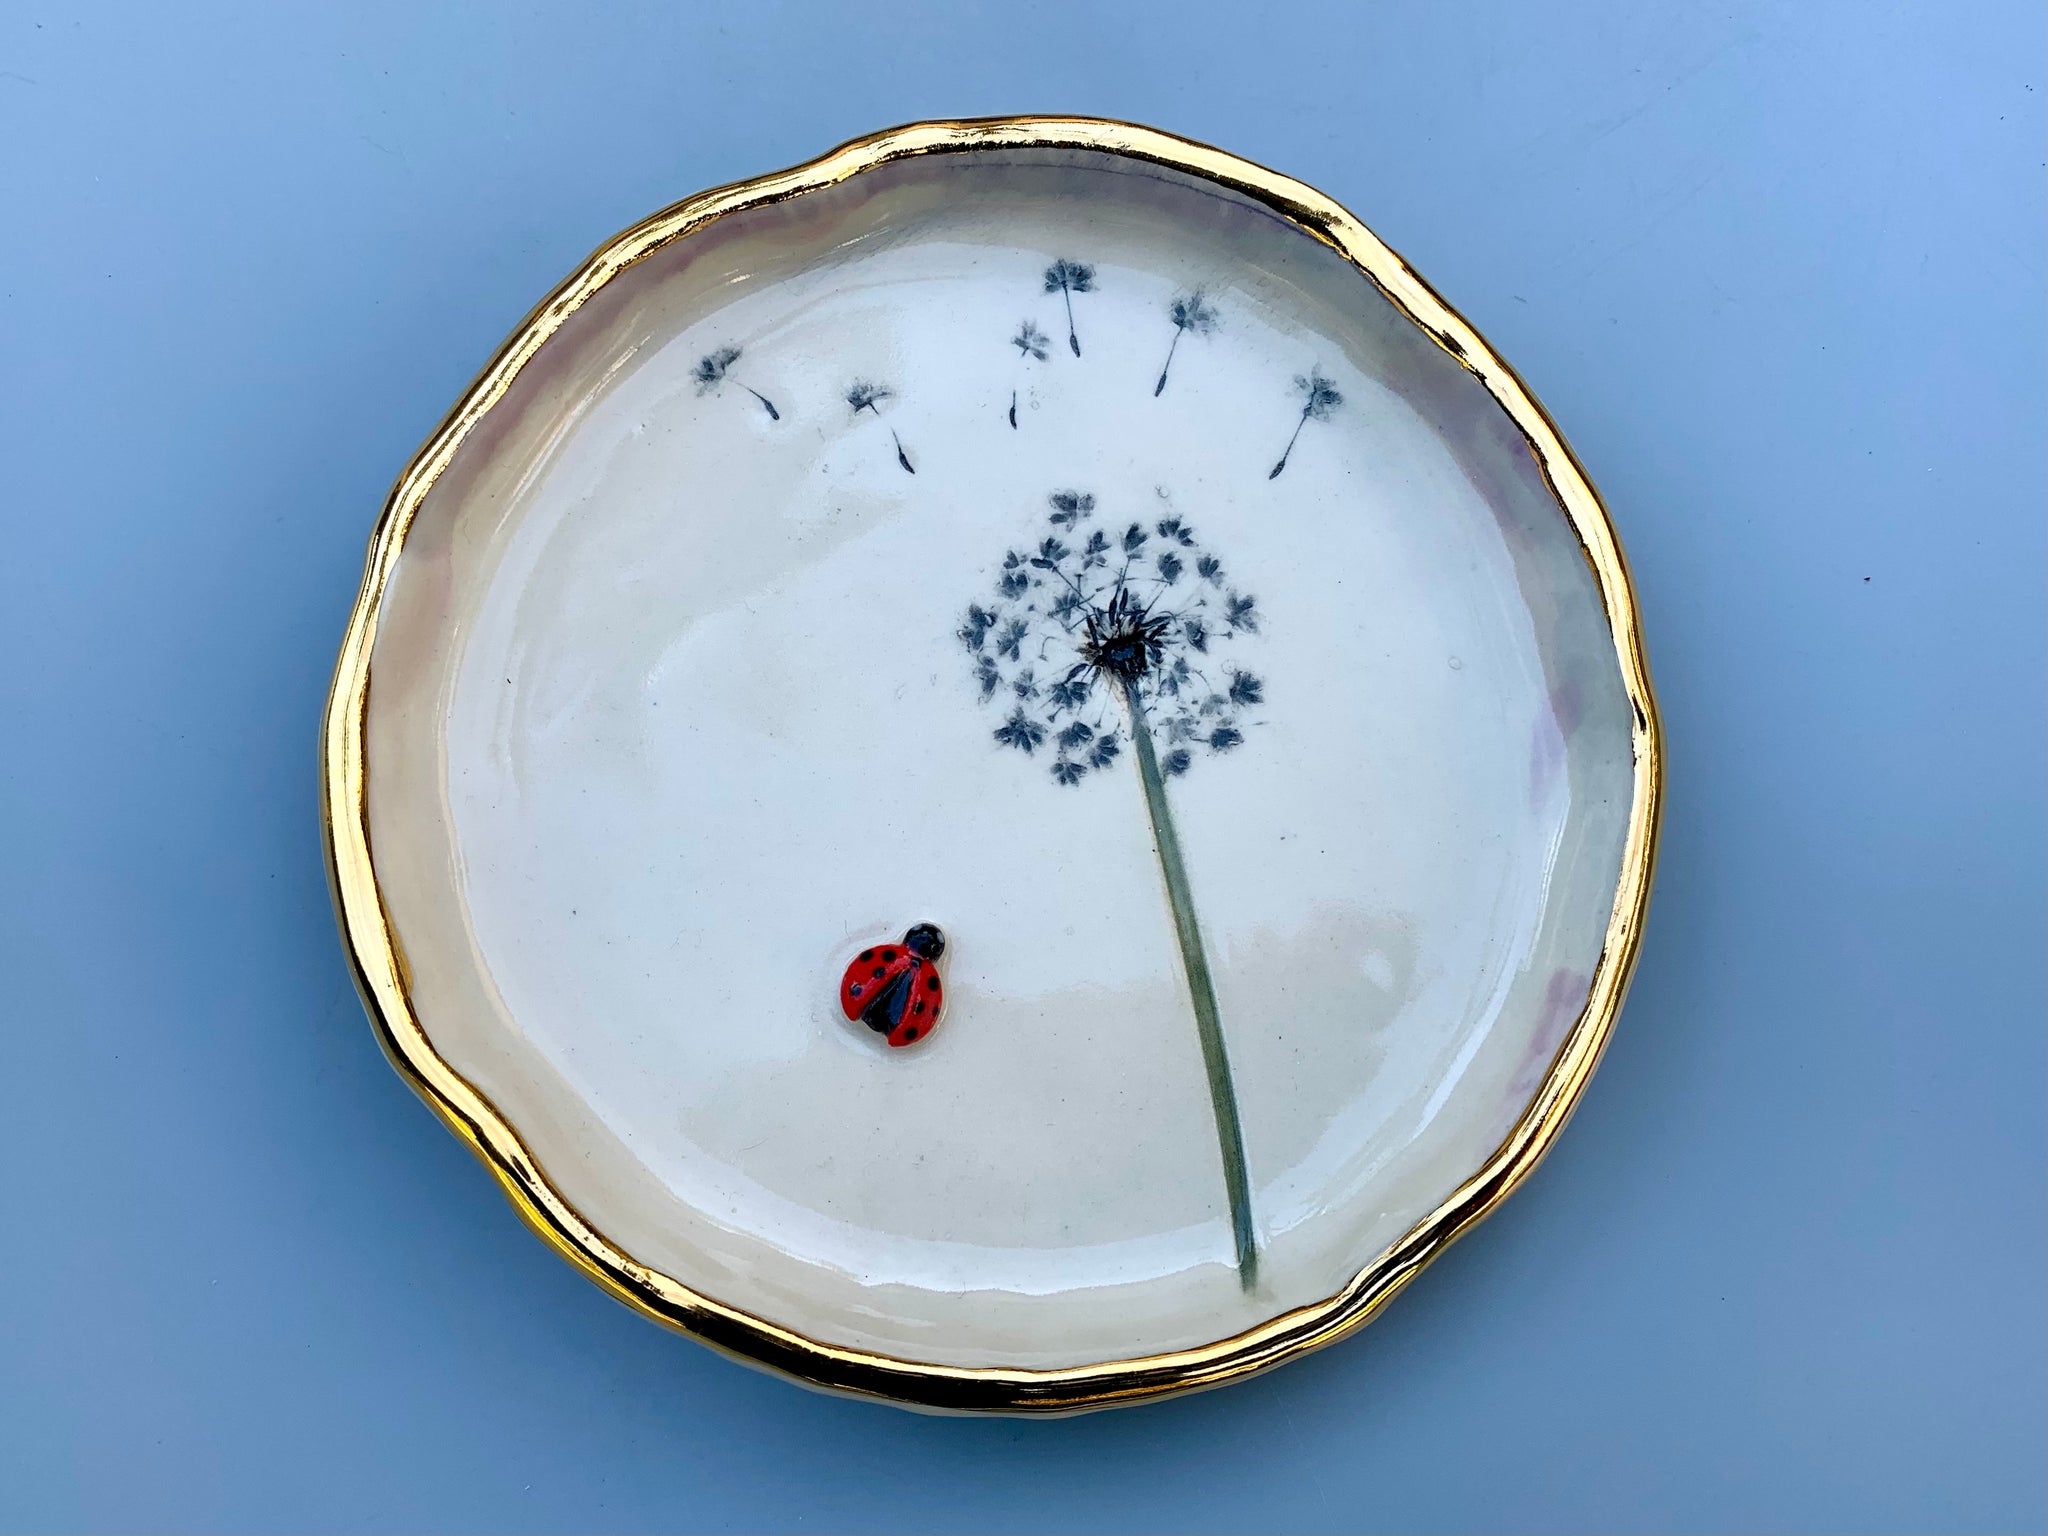 Large Ladybug Dish with Dandelion Seed Head, with 22kt gold accents - Vuvu Ceramics